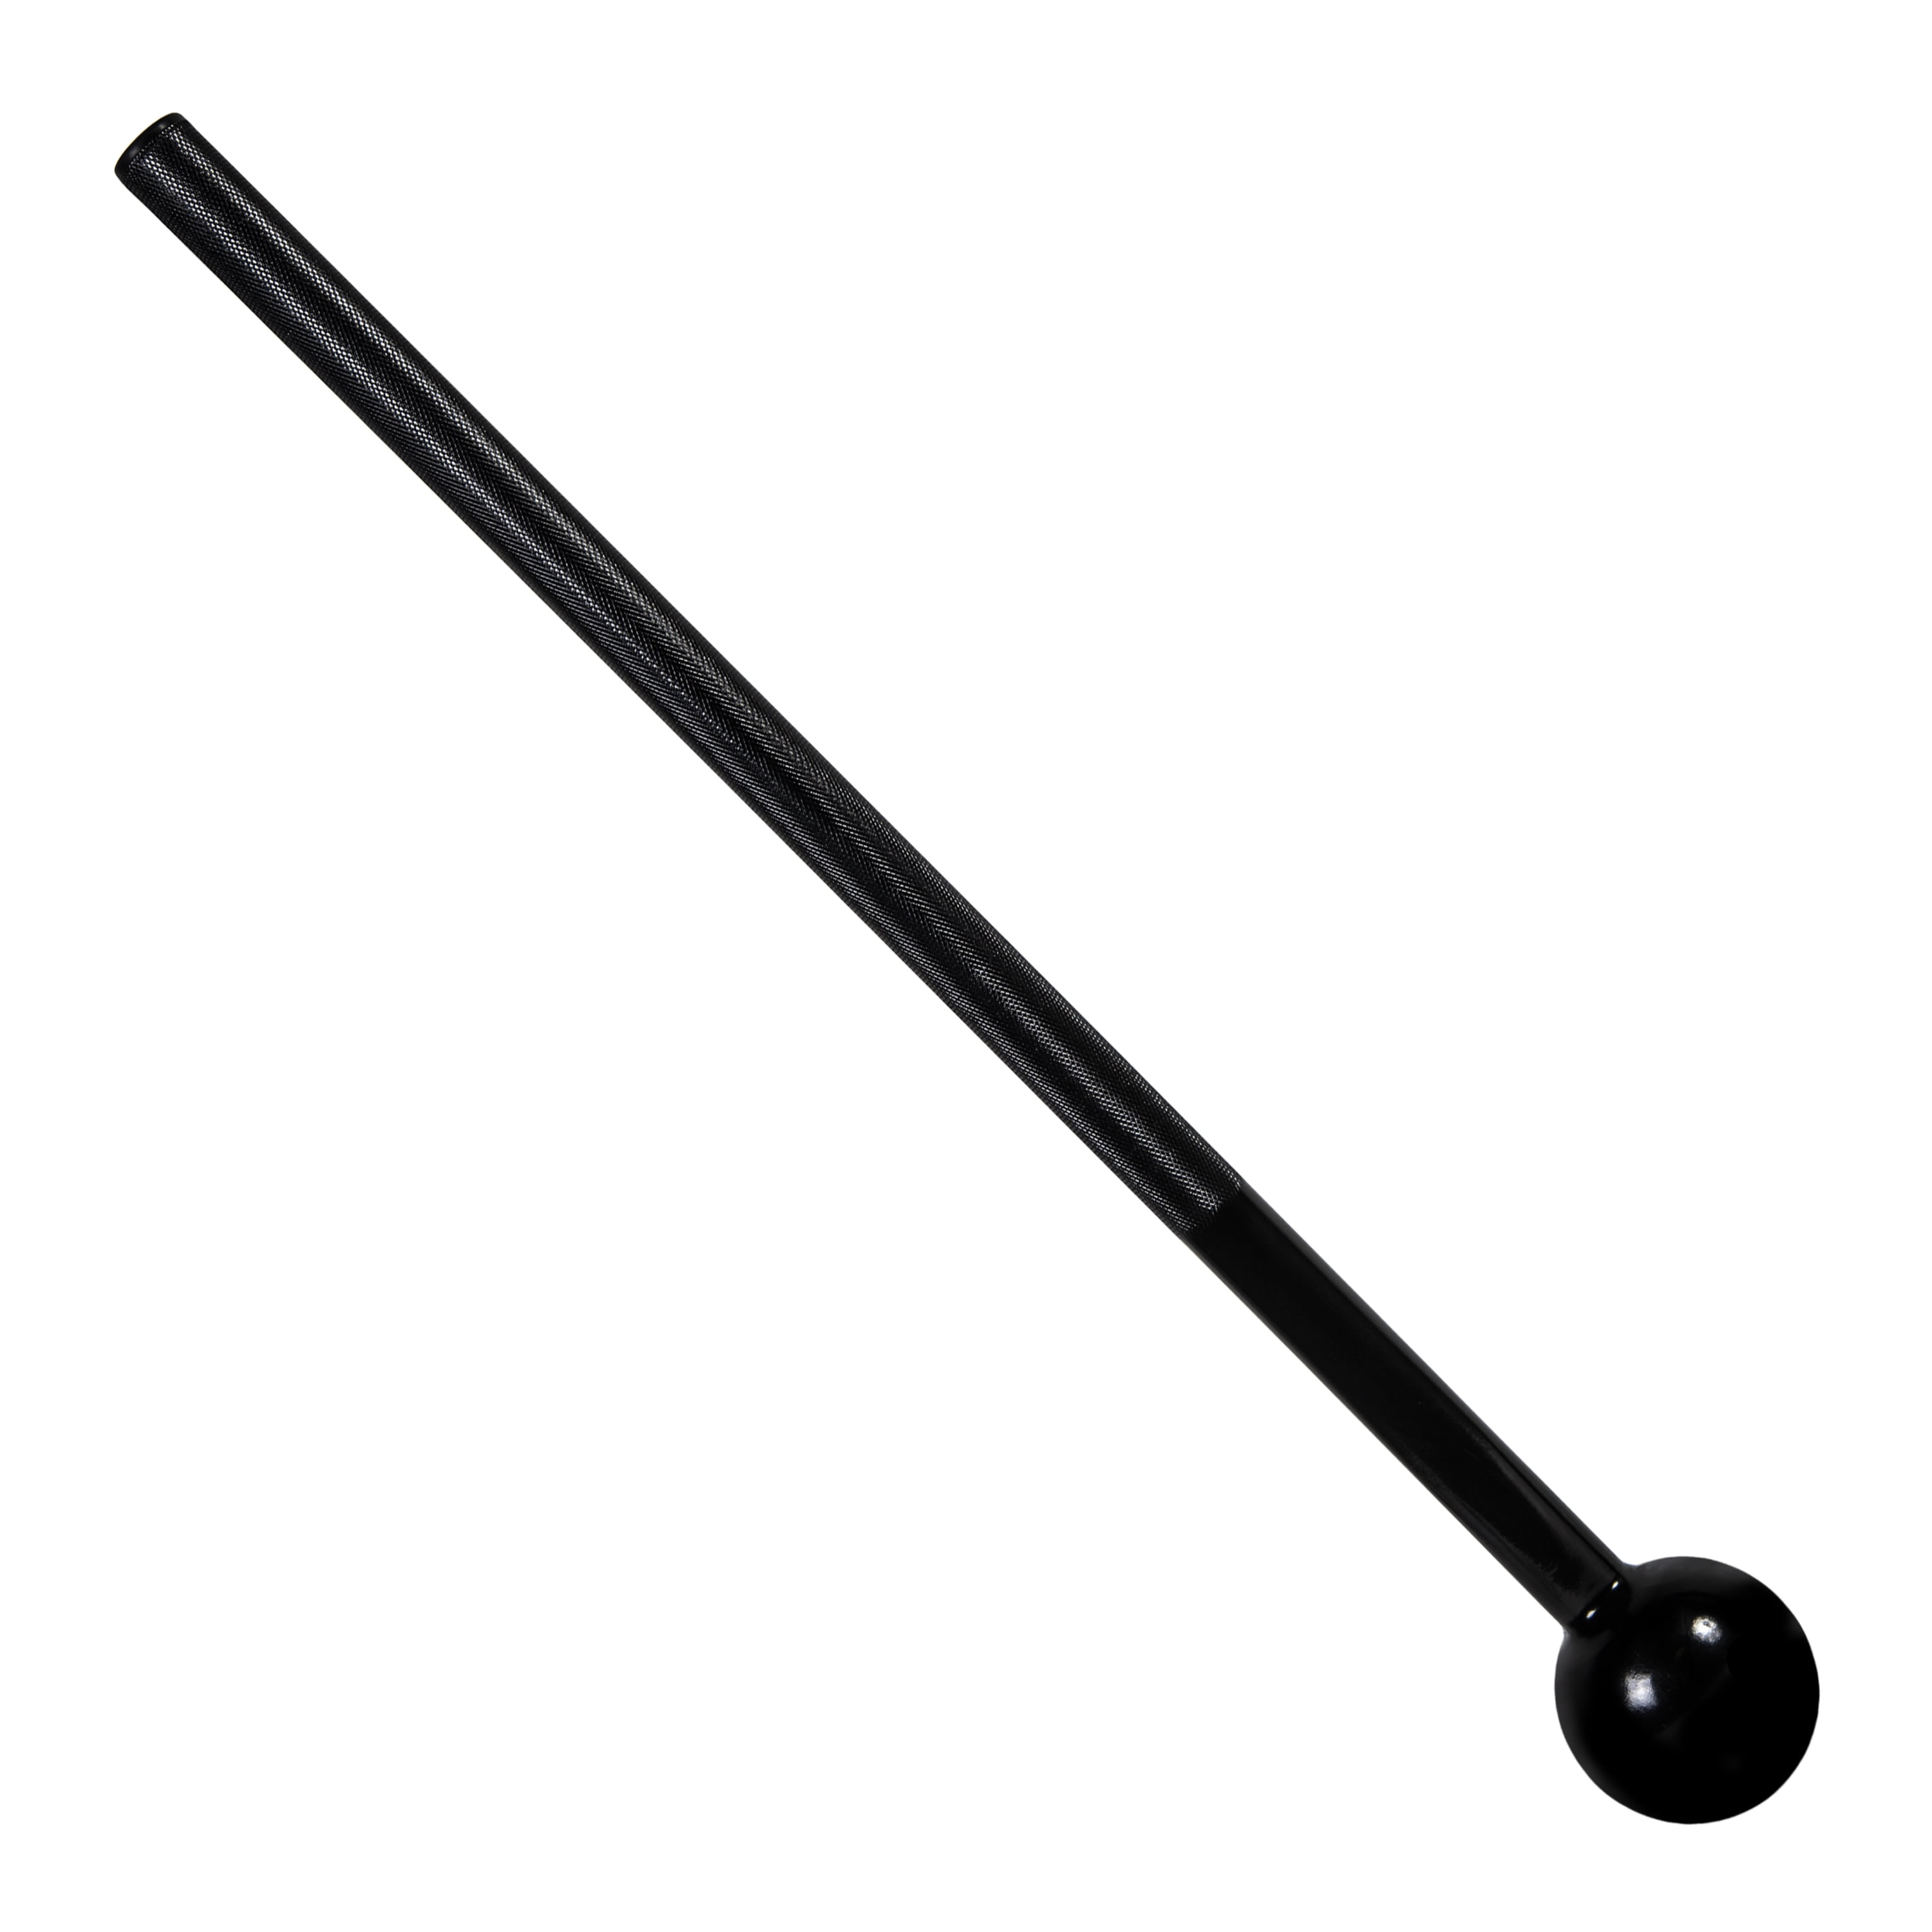 Macebells for Functional Fitness Mace Club Synergee Steel Mace Available from 5 to 40 lbs